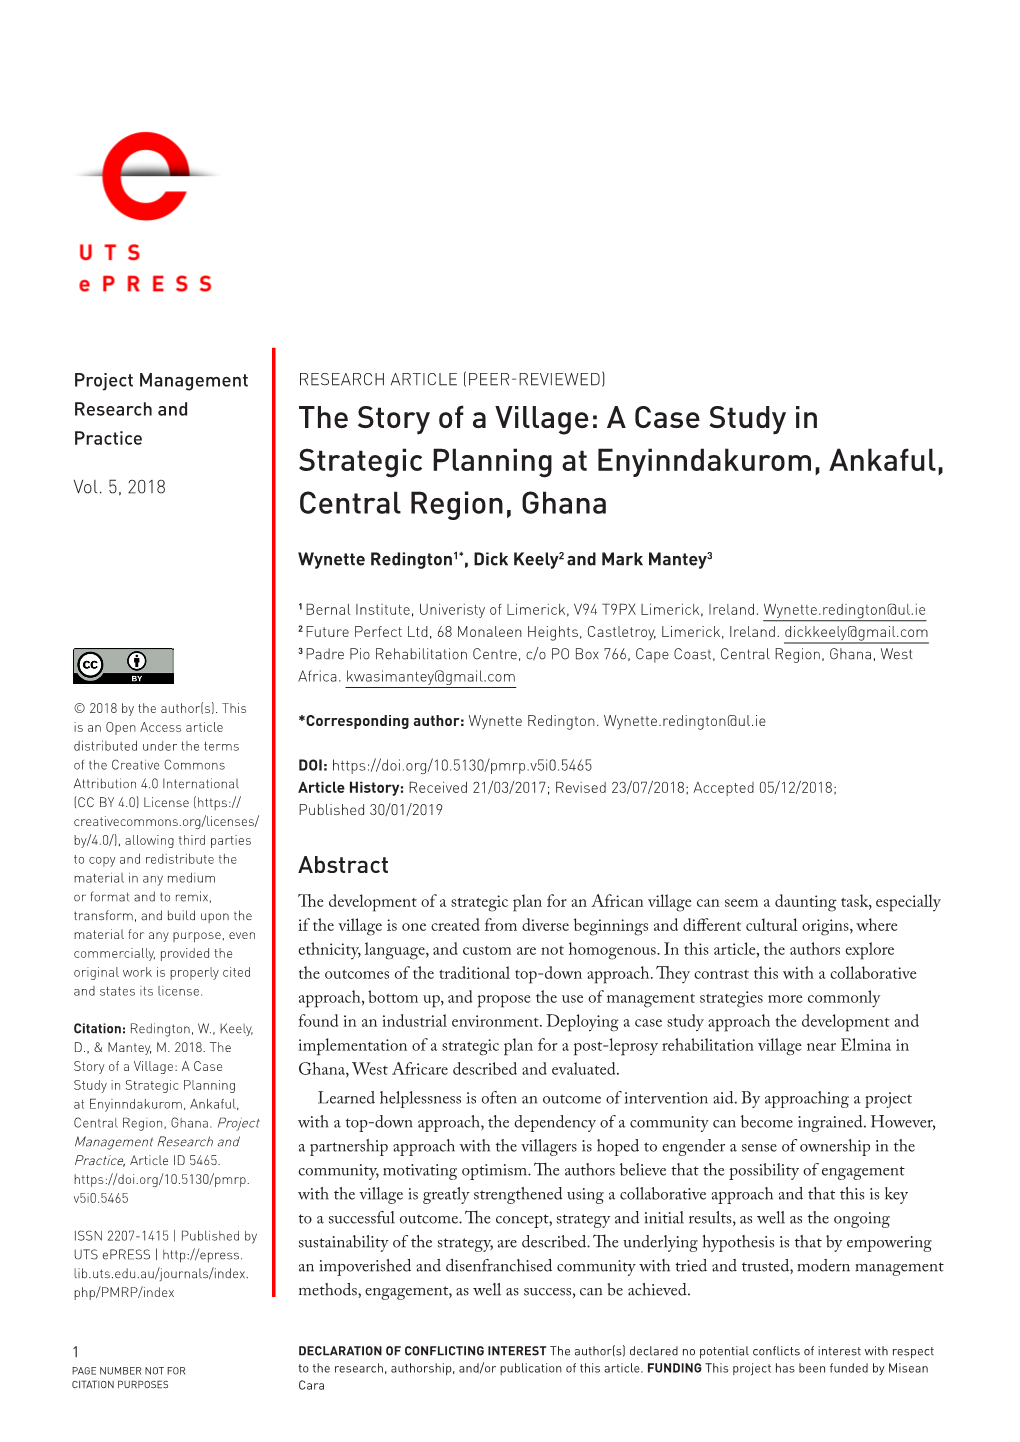 The Story of a Village: a Case Study in Strategic Planning at Enyinndakurom, Ankaful, Central Region, Ghana